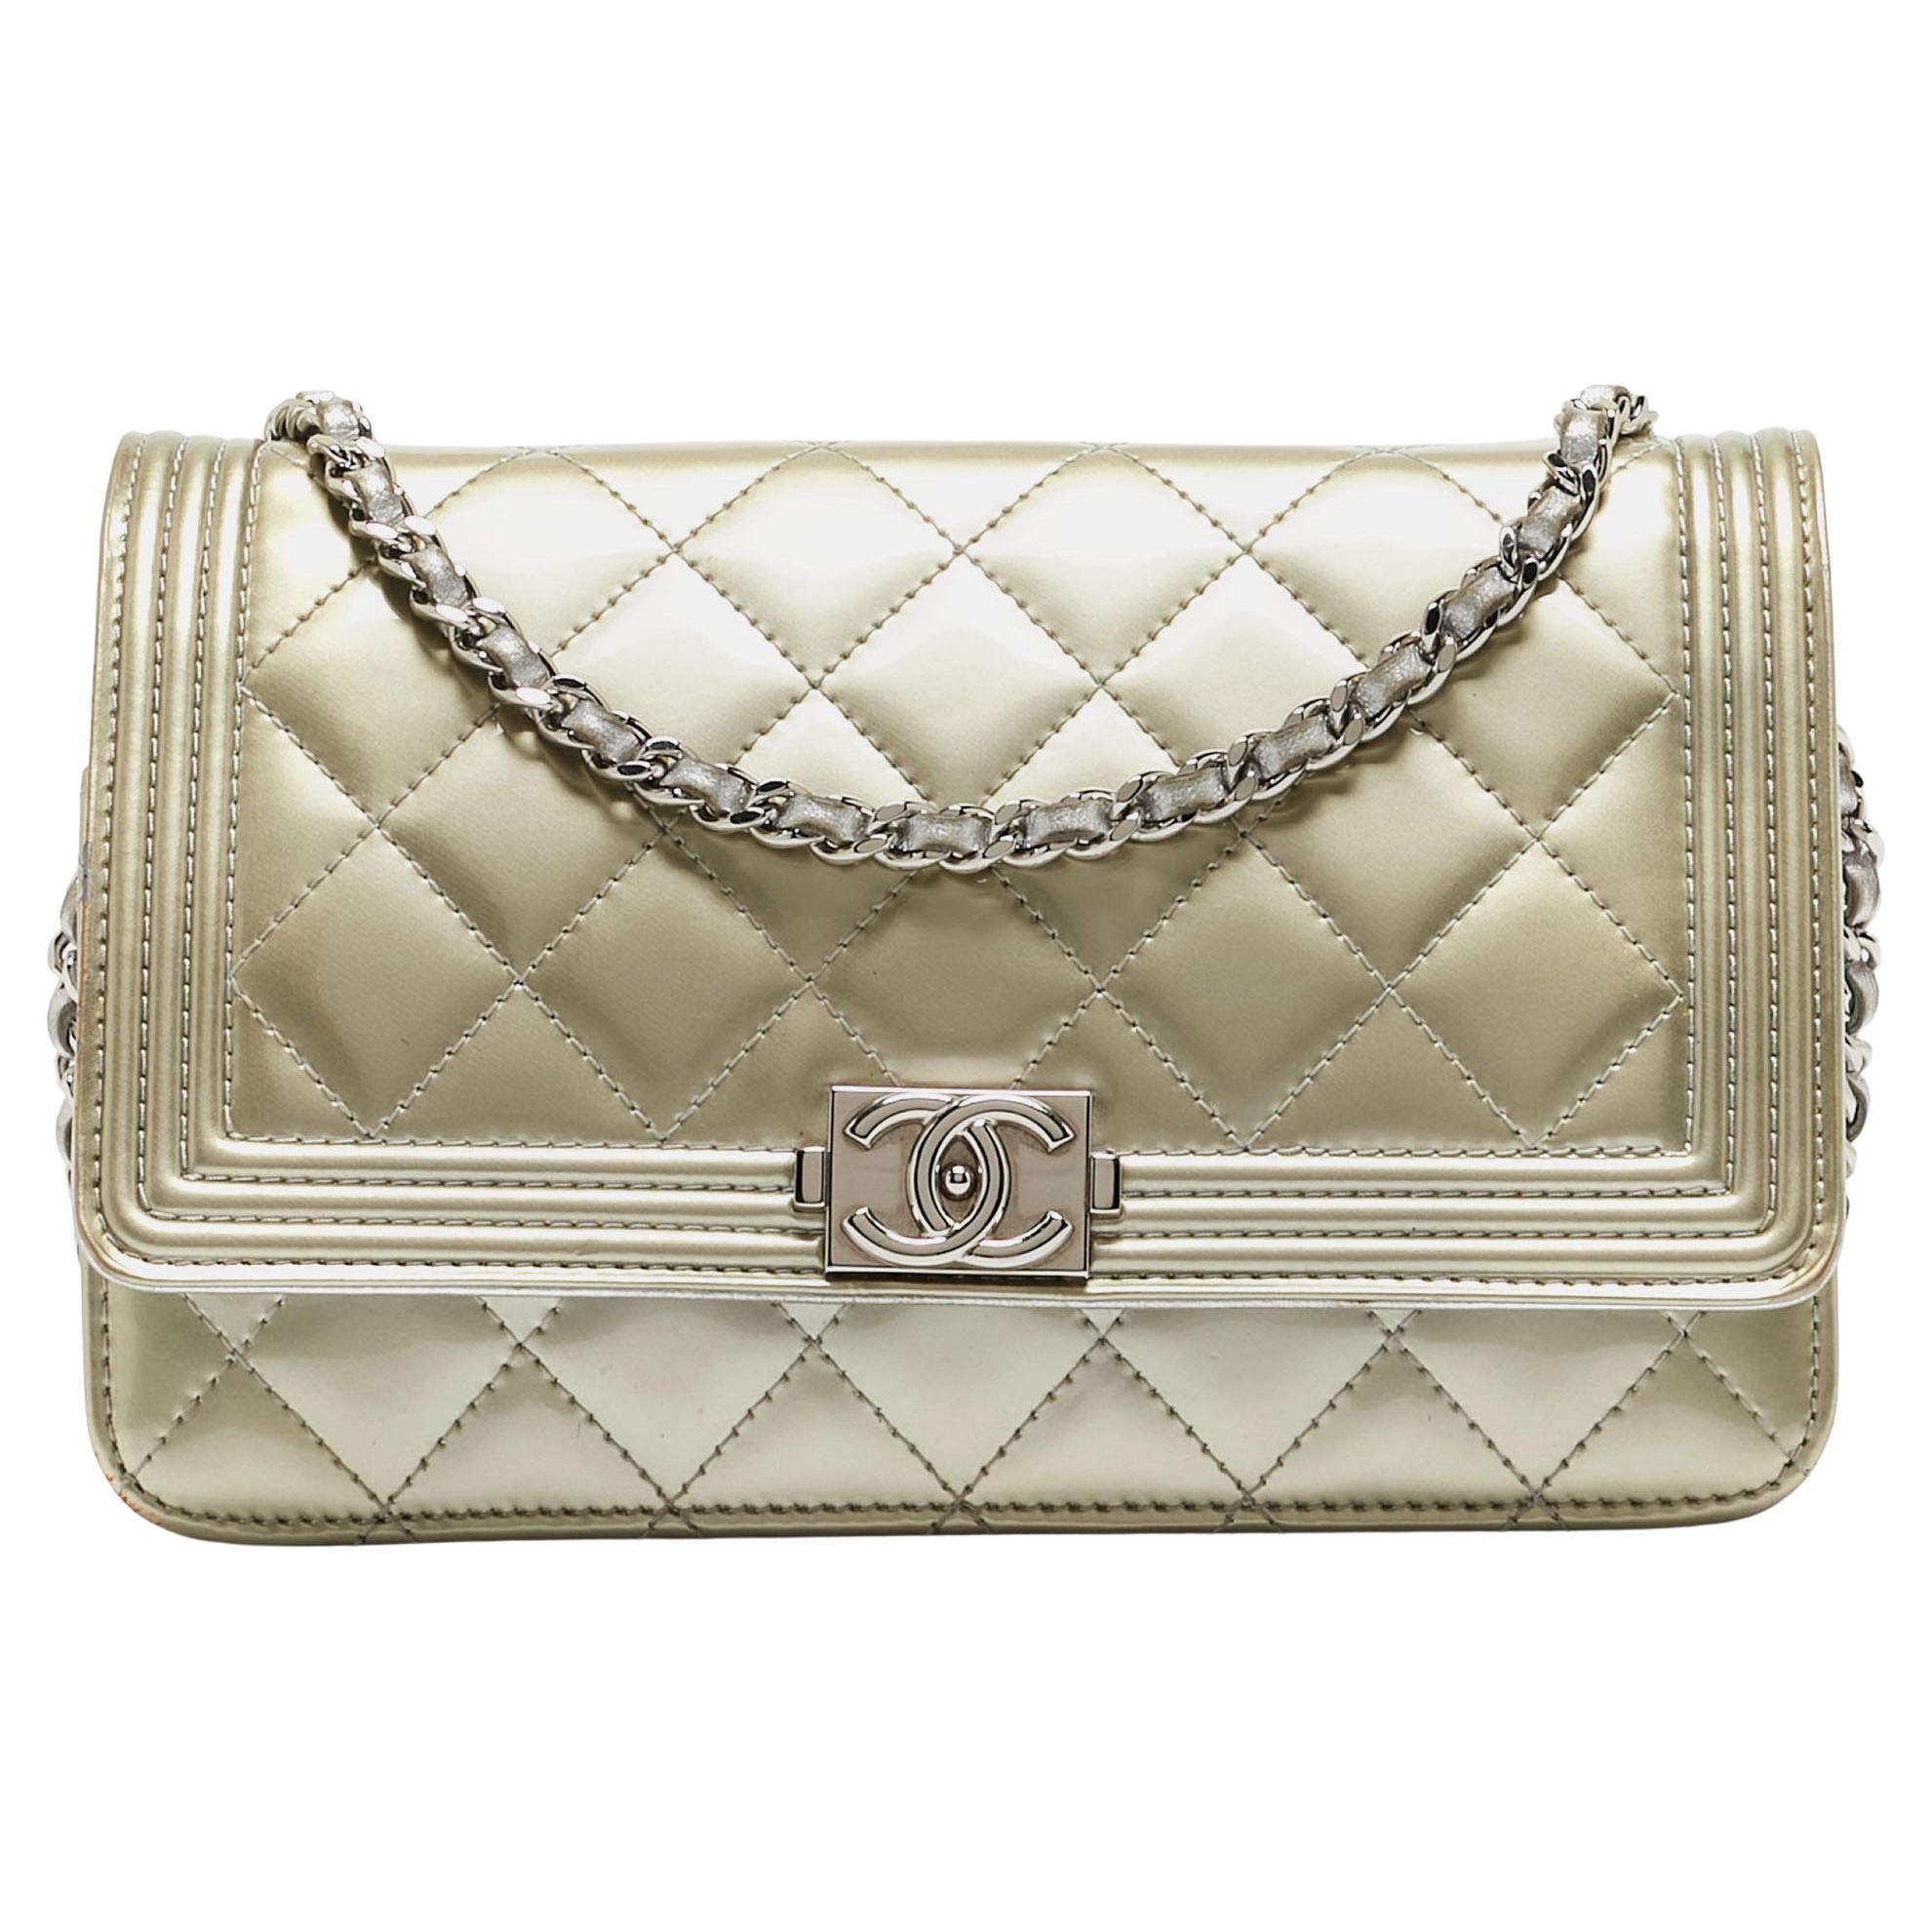 Chanel Pale Gold Quilted Patent Leather Boy WOC Bag